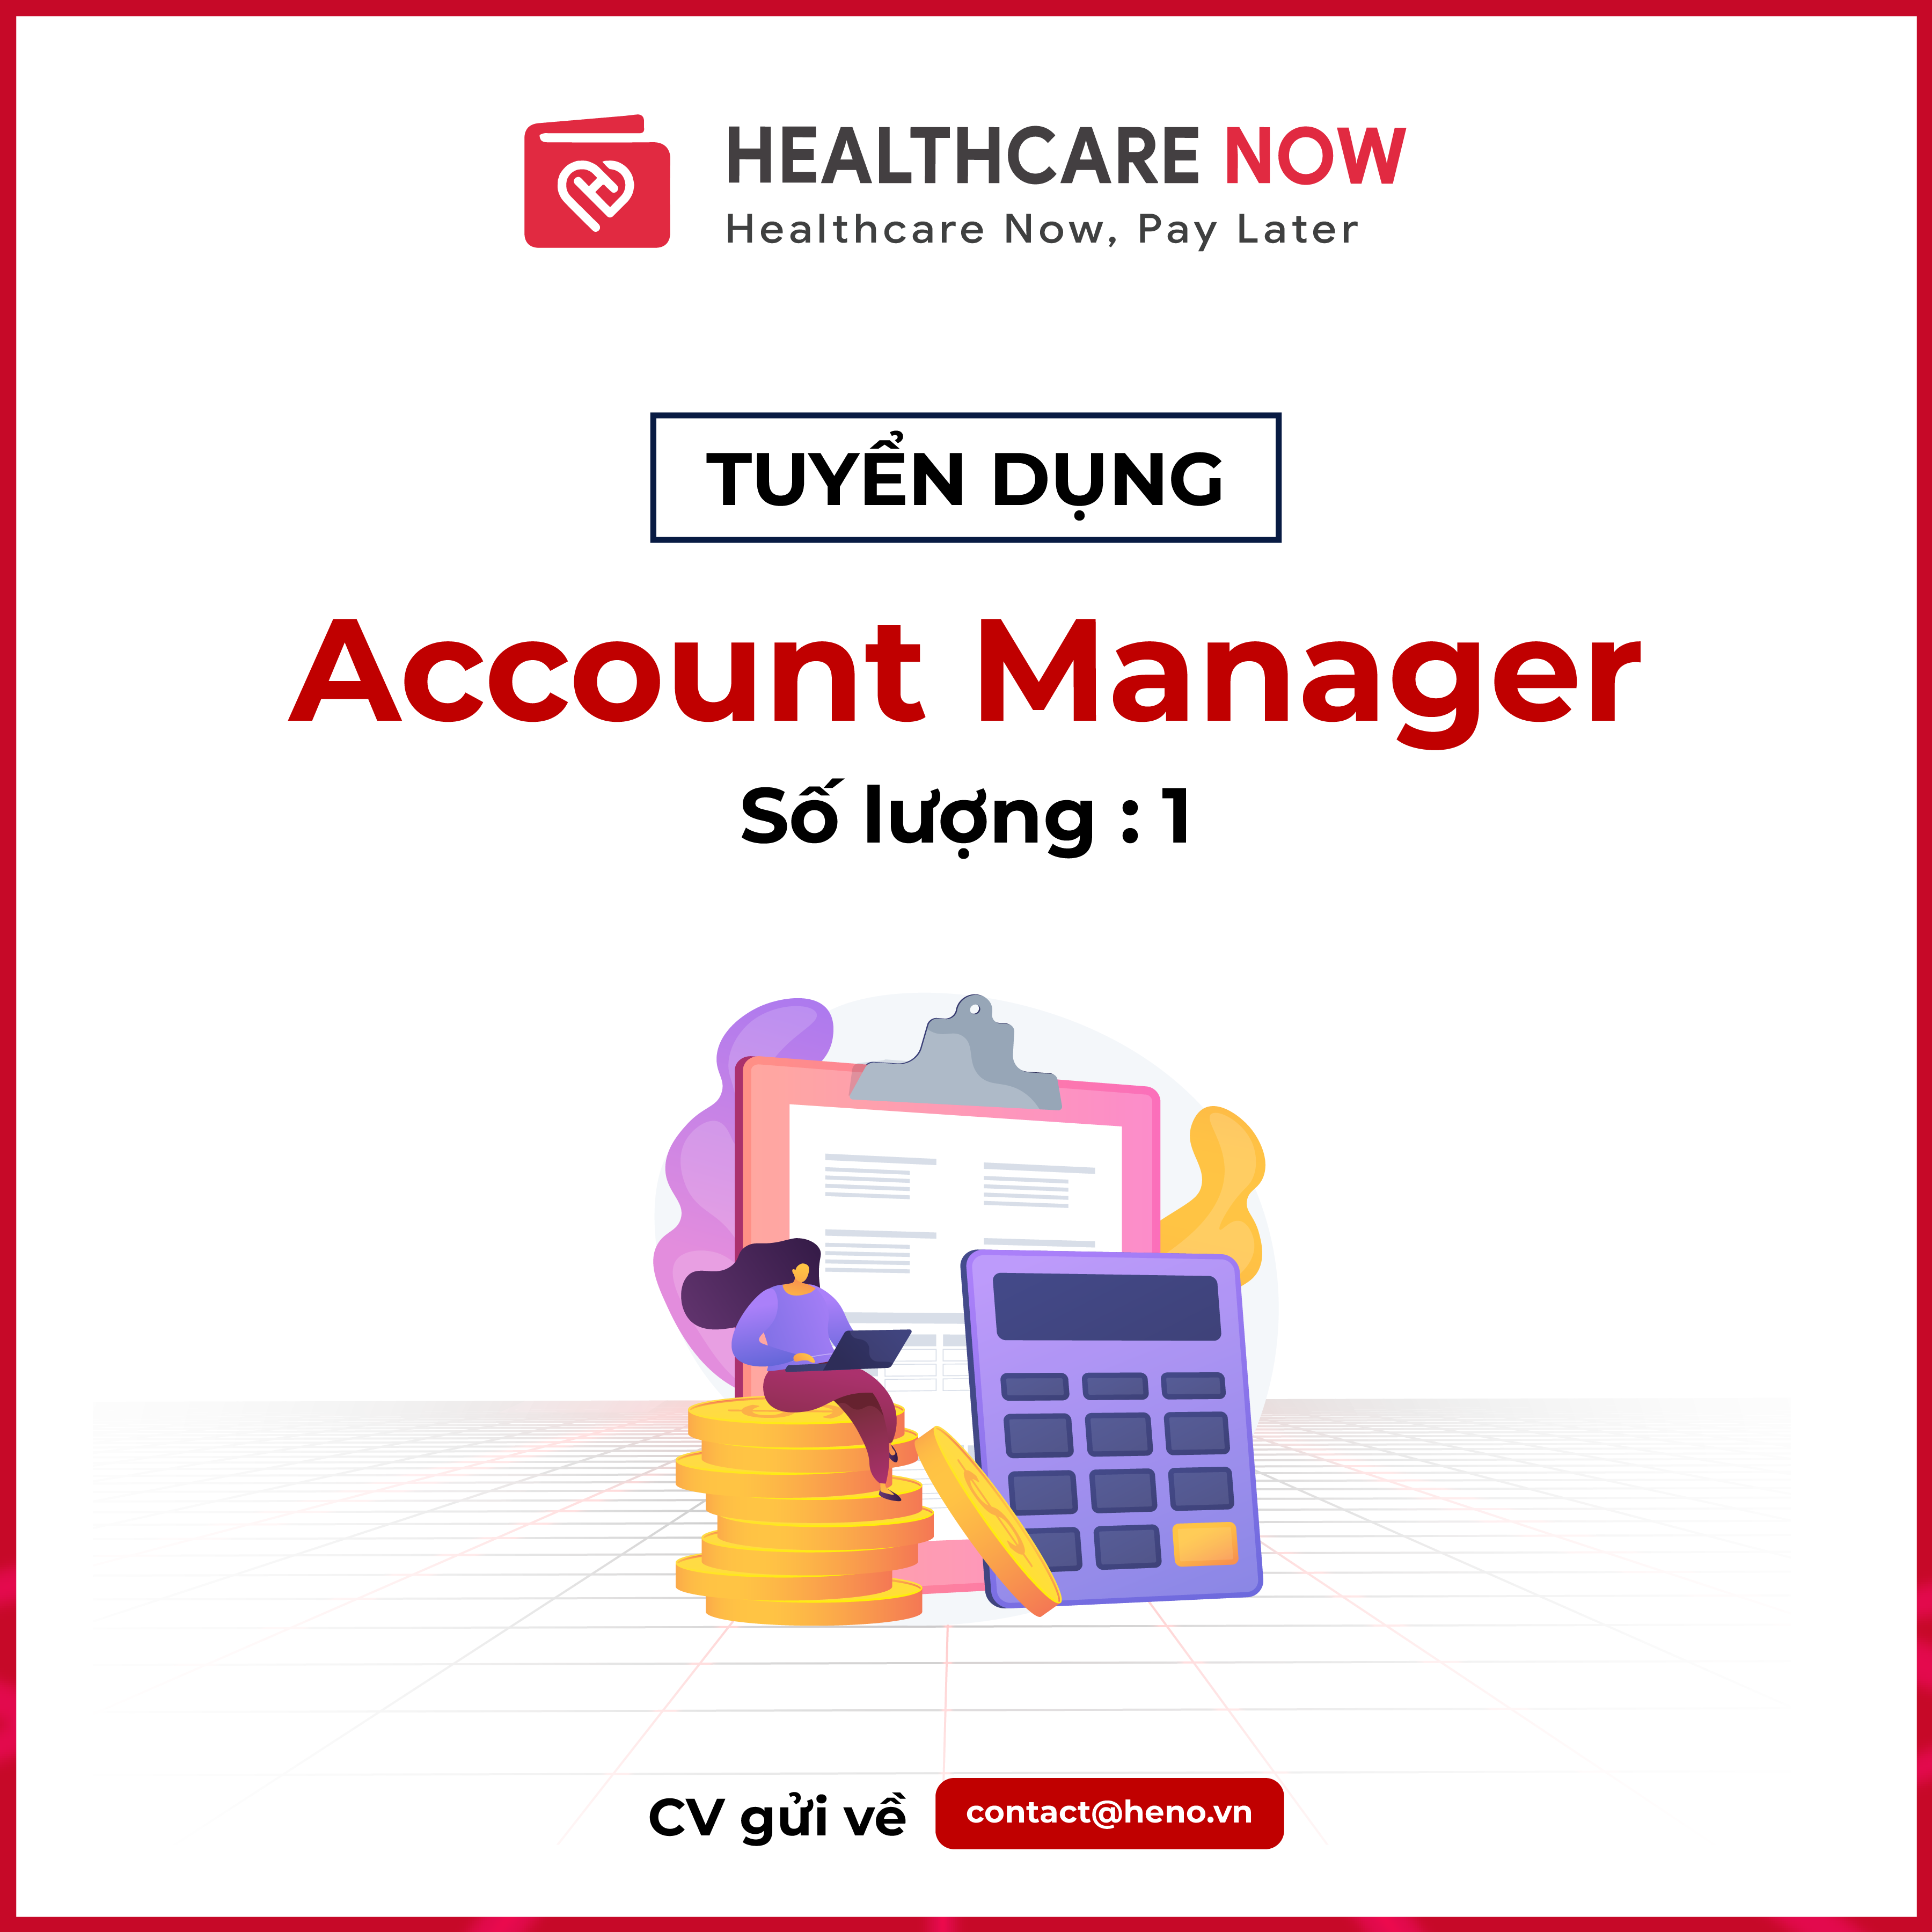 HENO_TUYỂN DỤNG_Account Manager